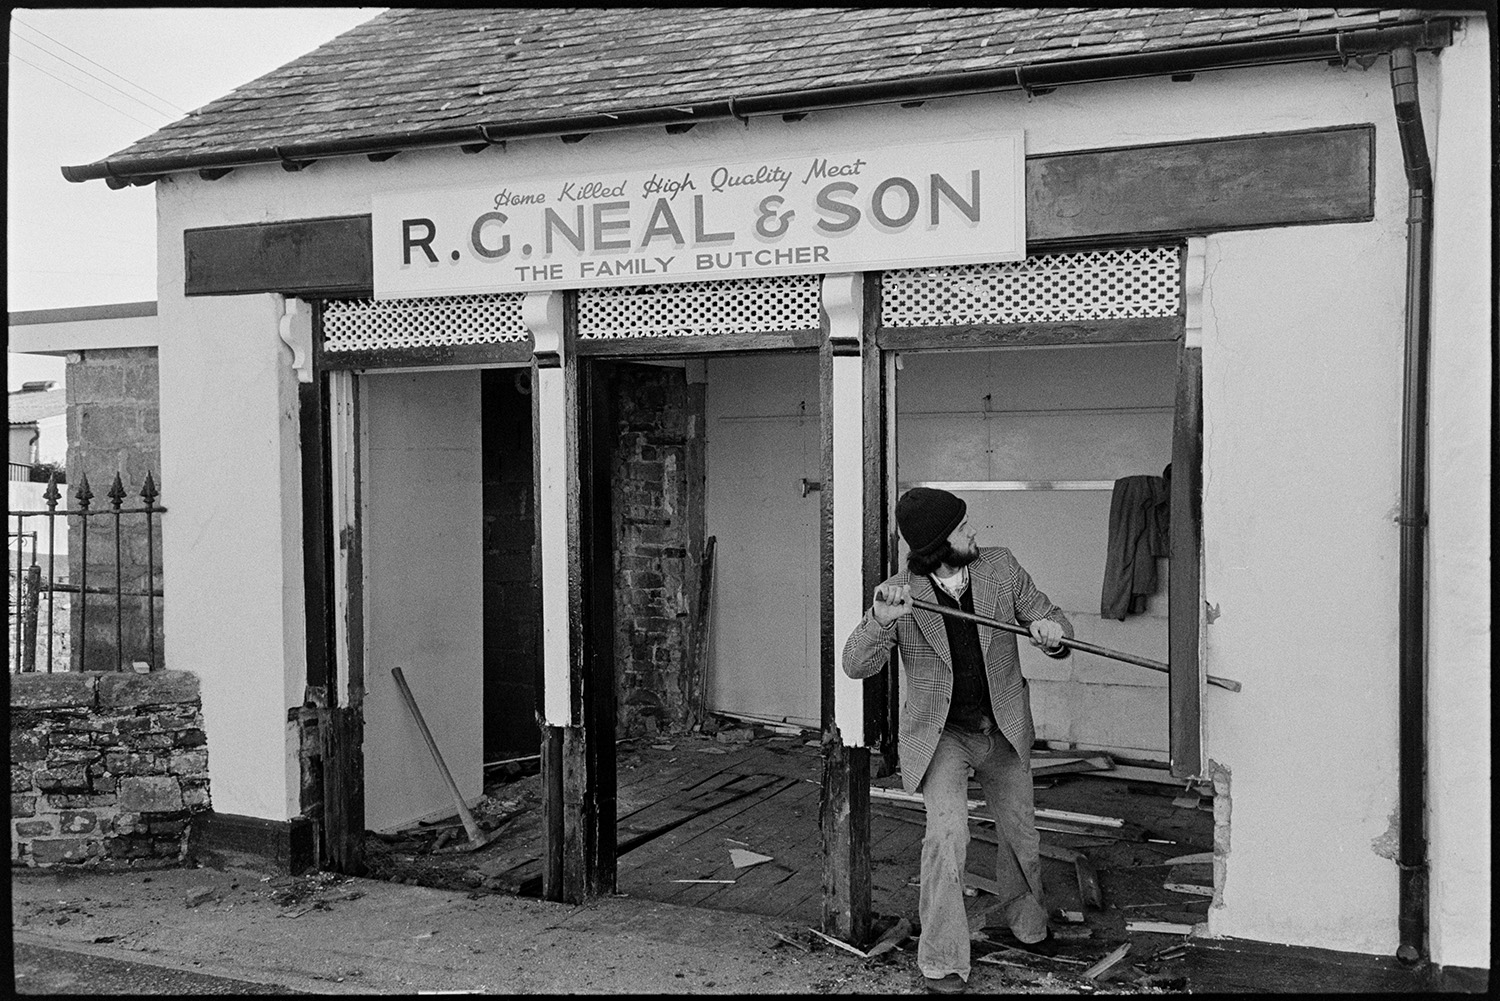 Renovation front of butchers shop. 
[A man knocking down the front and interior of R G Neal & Son butchers shop in Dolton, before refurbishing it. The sign is above the shop.]